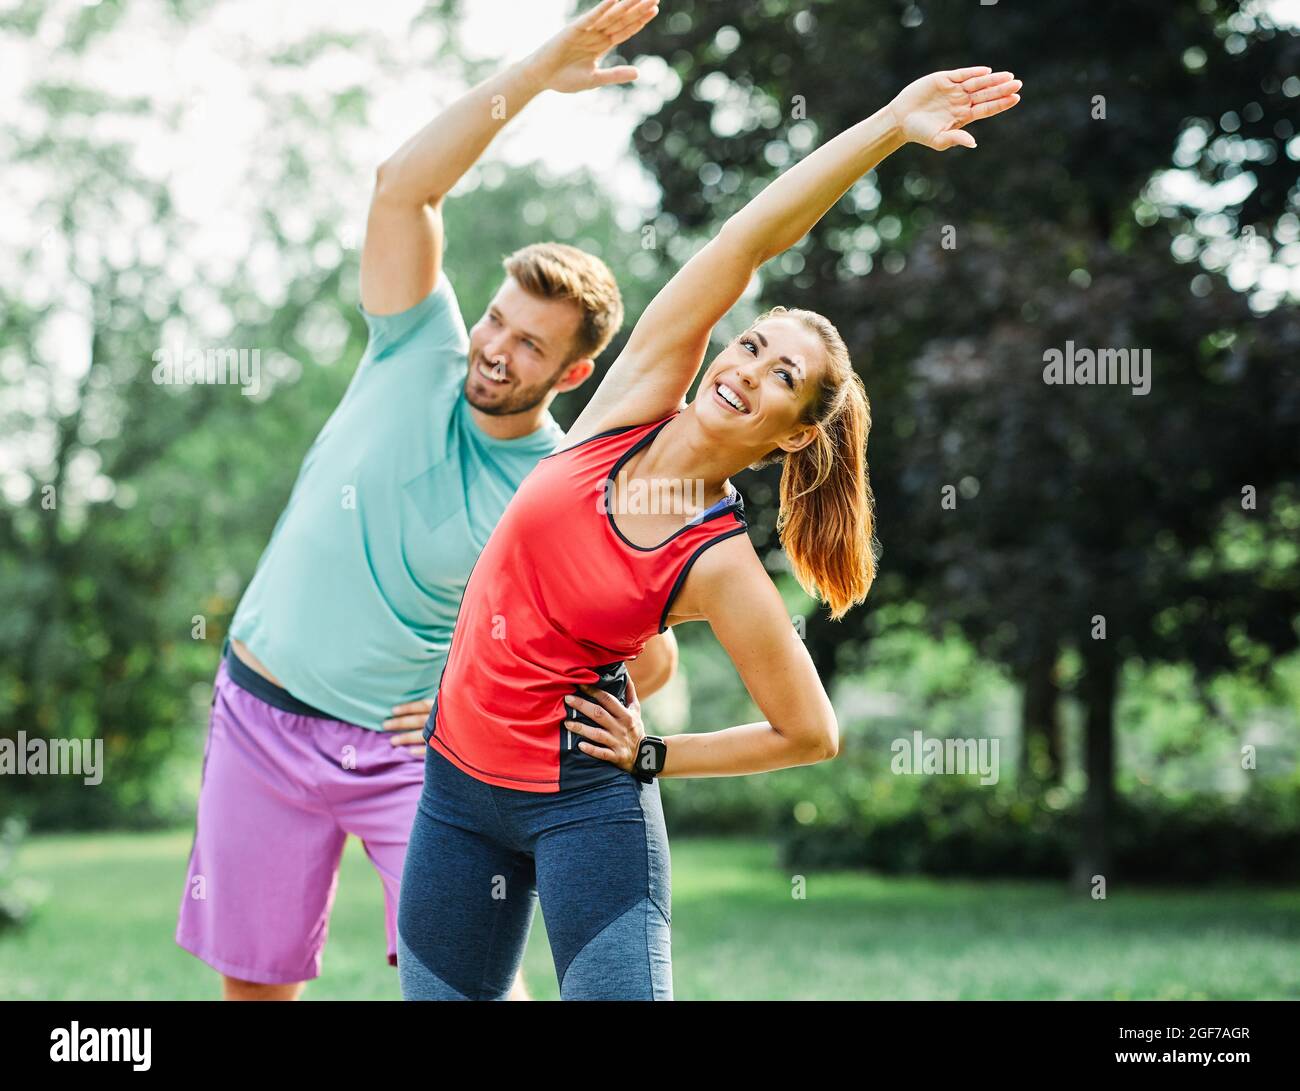 Fitness Frau Park Übung Lifestyle Outdoor Sport gesundes Paar Stretching junge fit Training Athlet Stockfoto